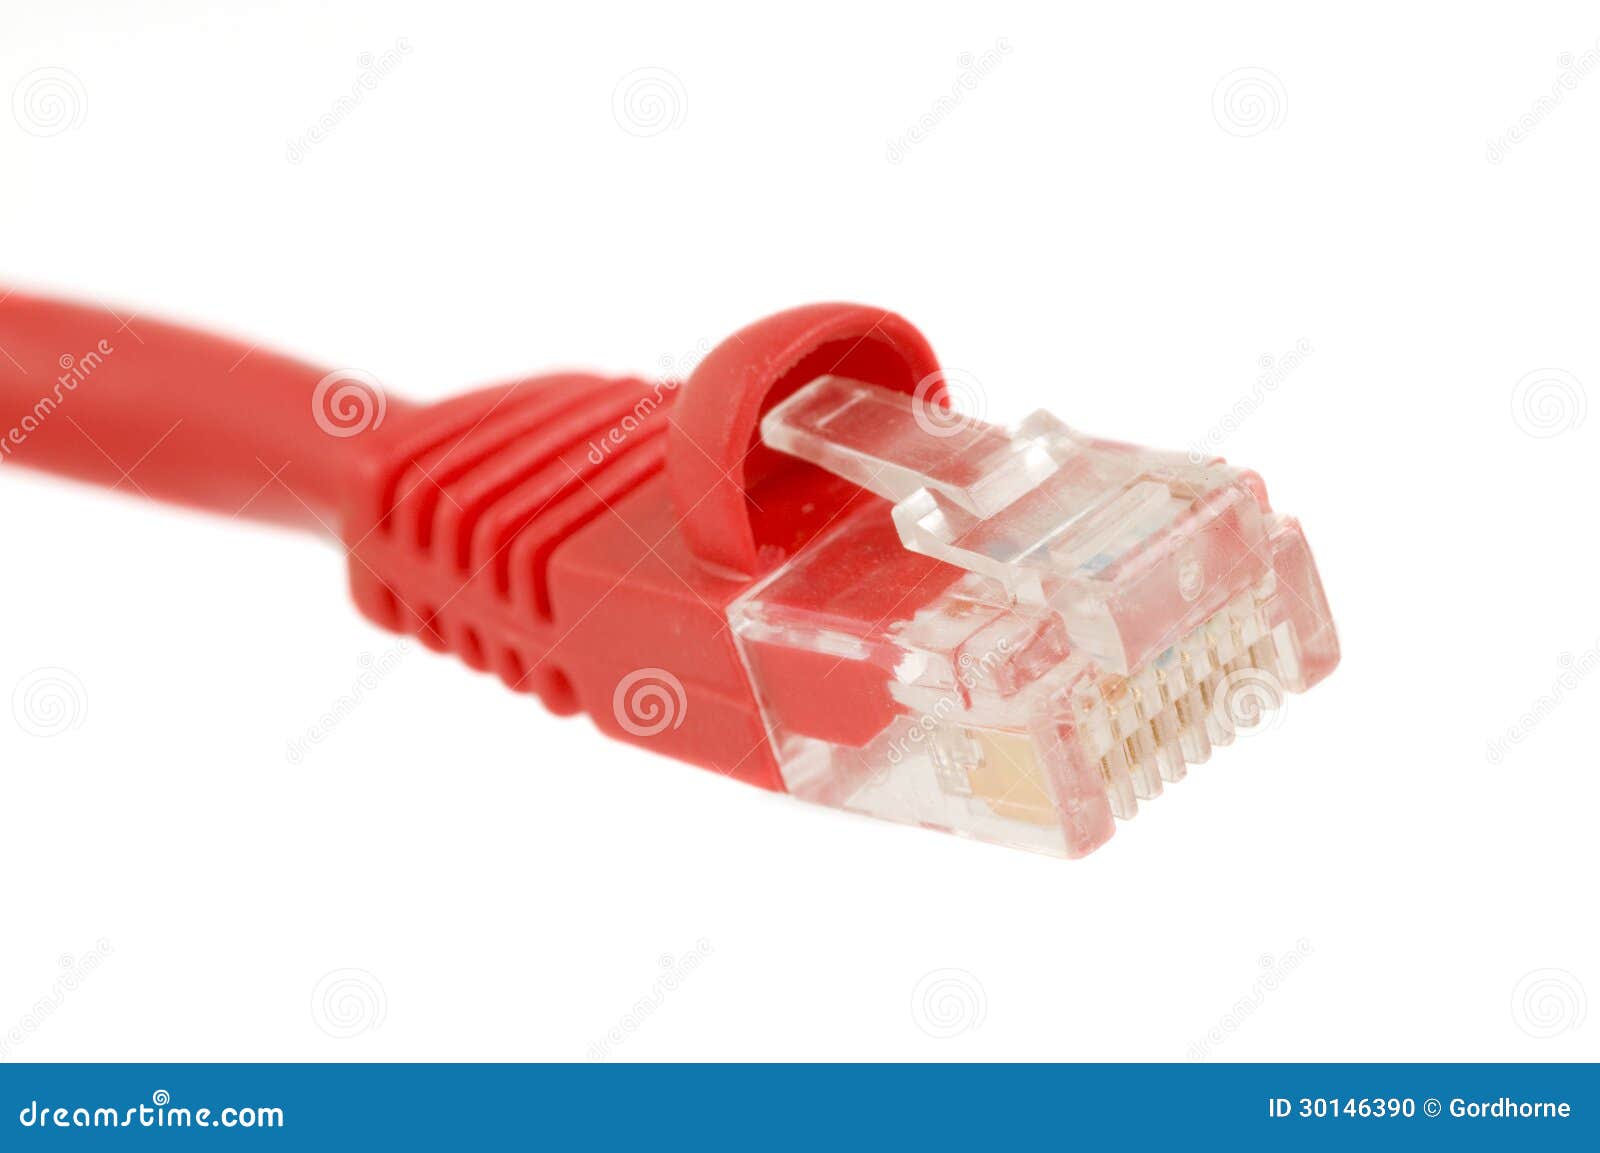 ethernet cable connection